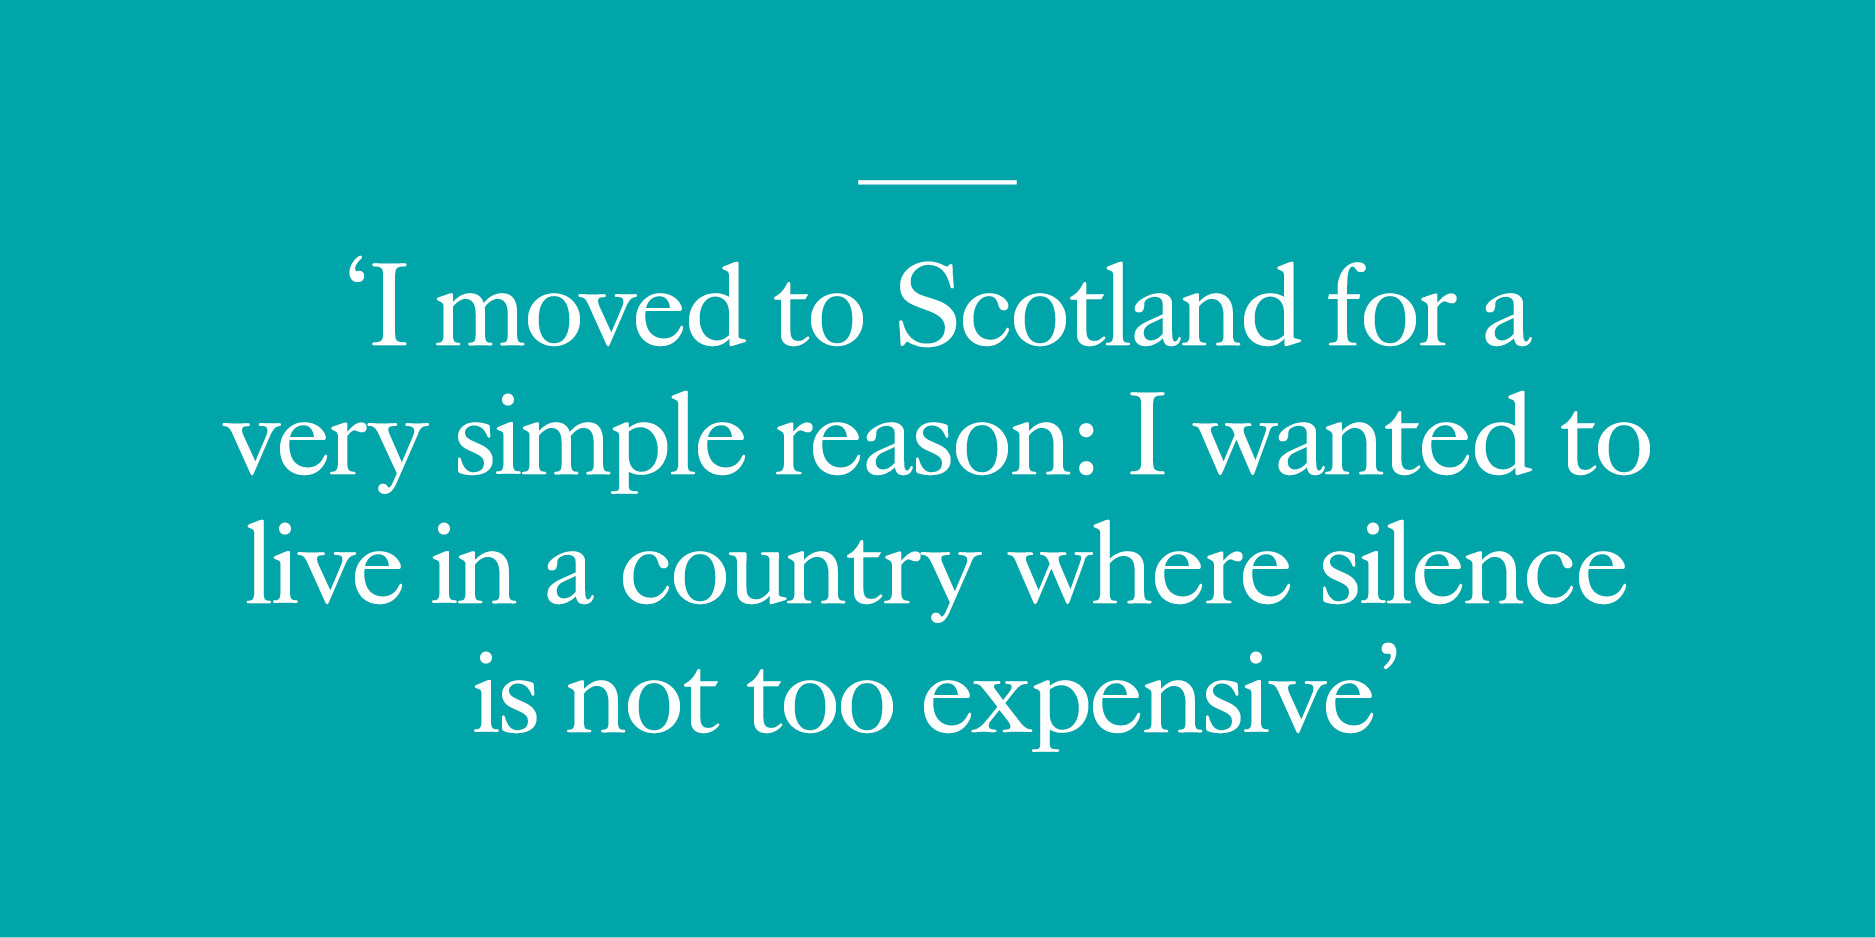 I moved to Scotland for a very simple reason: I wanted to live in a country where silence is not too expensive.